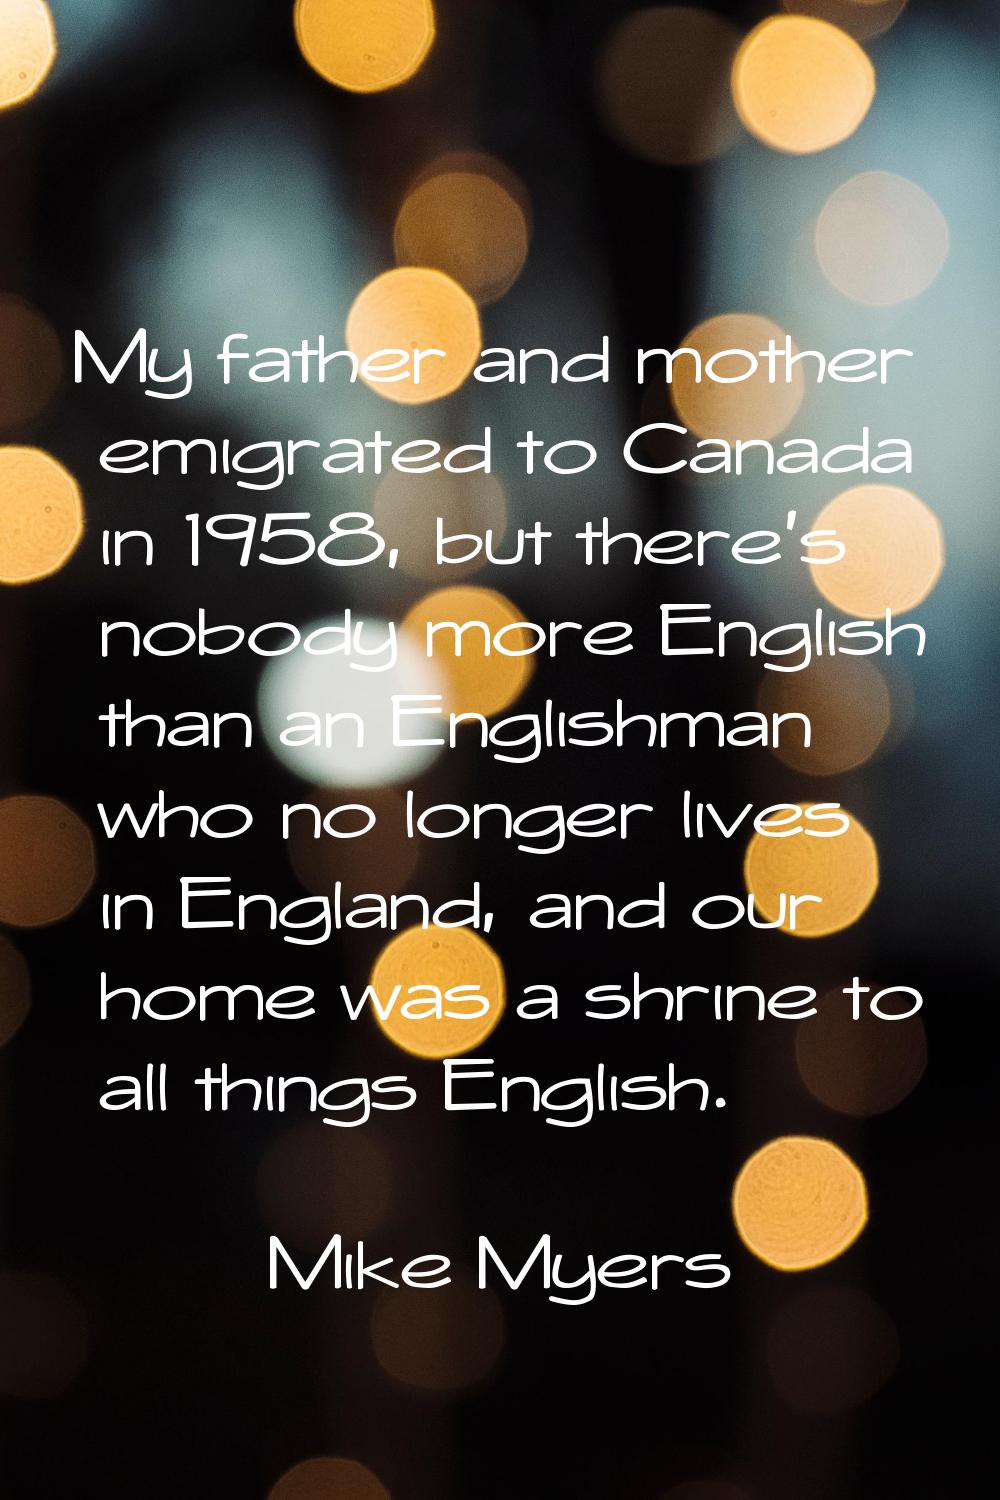 My father and mother emigrated to Canada in 1958, but there's nobody more English than an Englishma